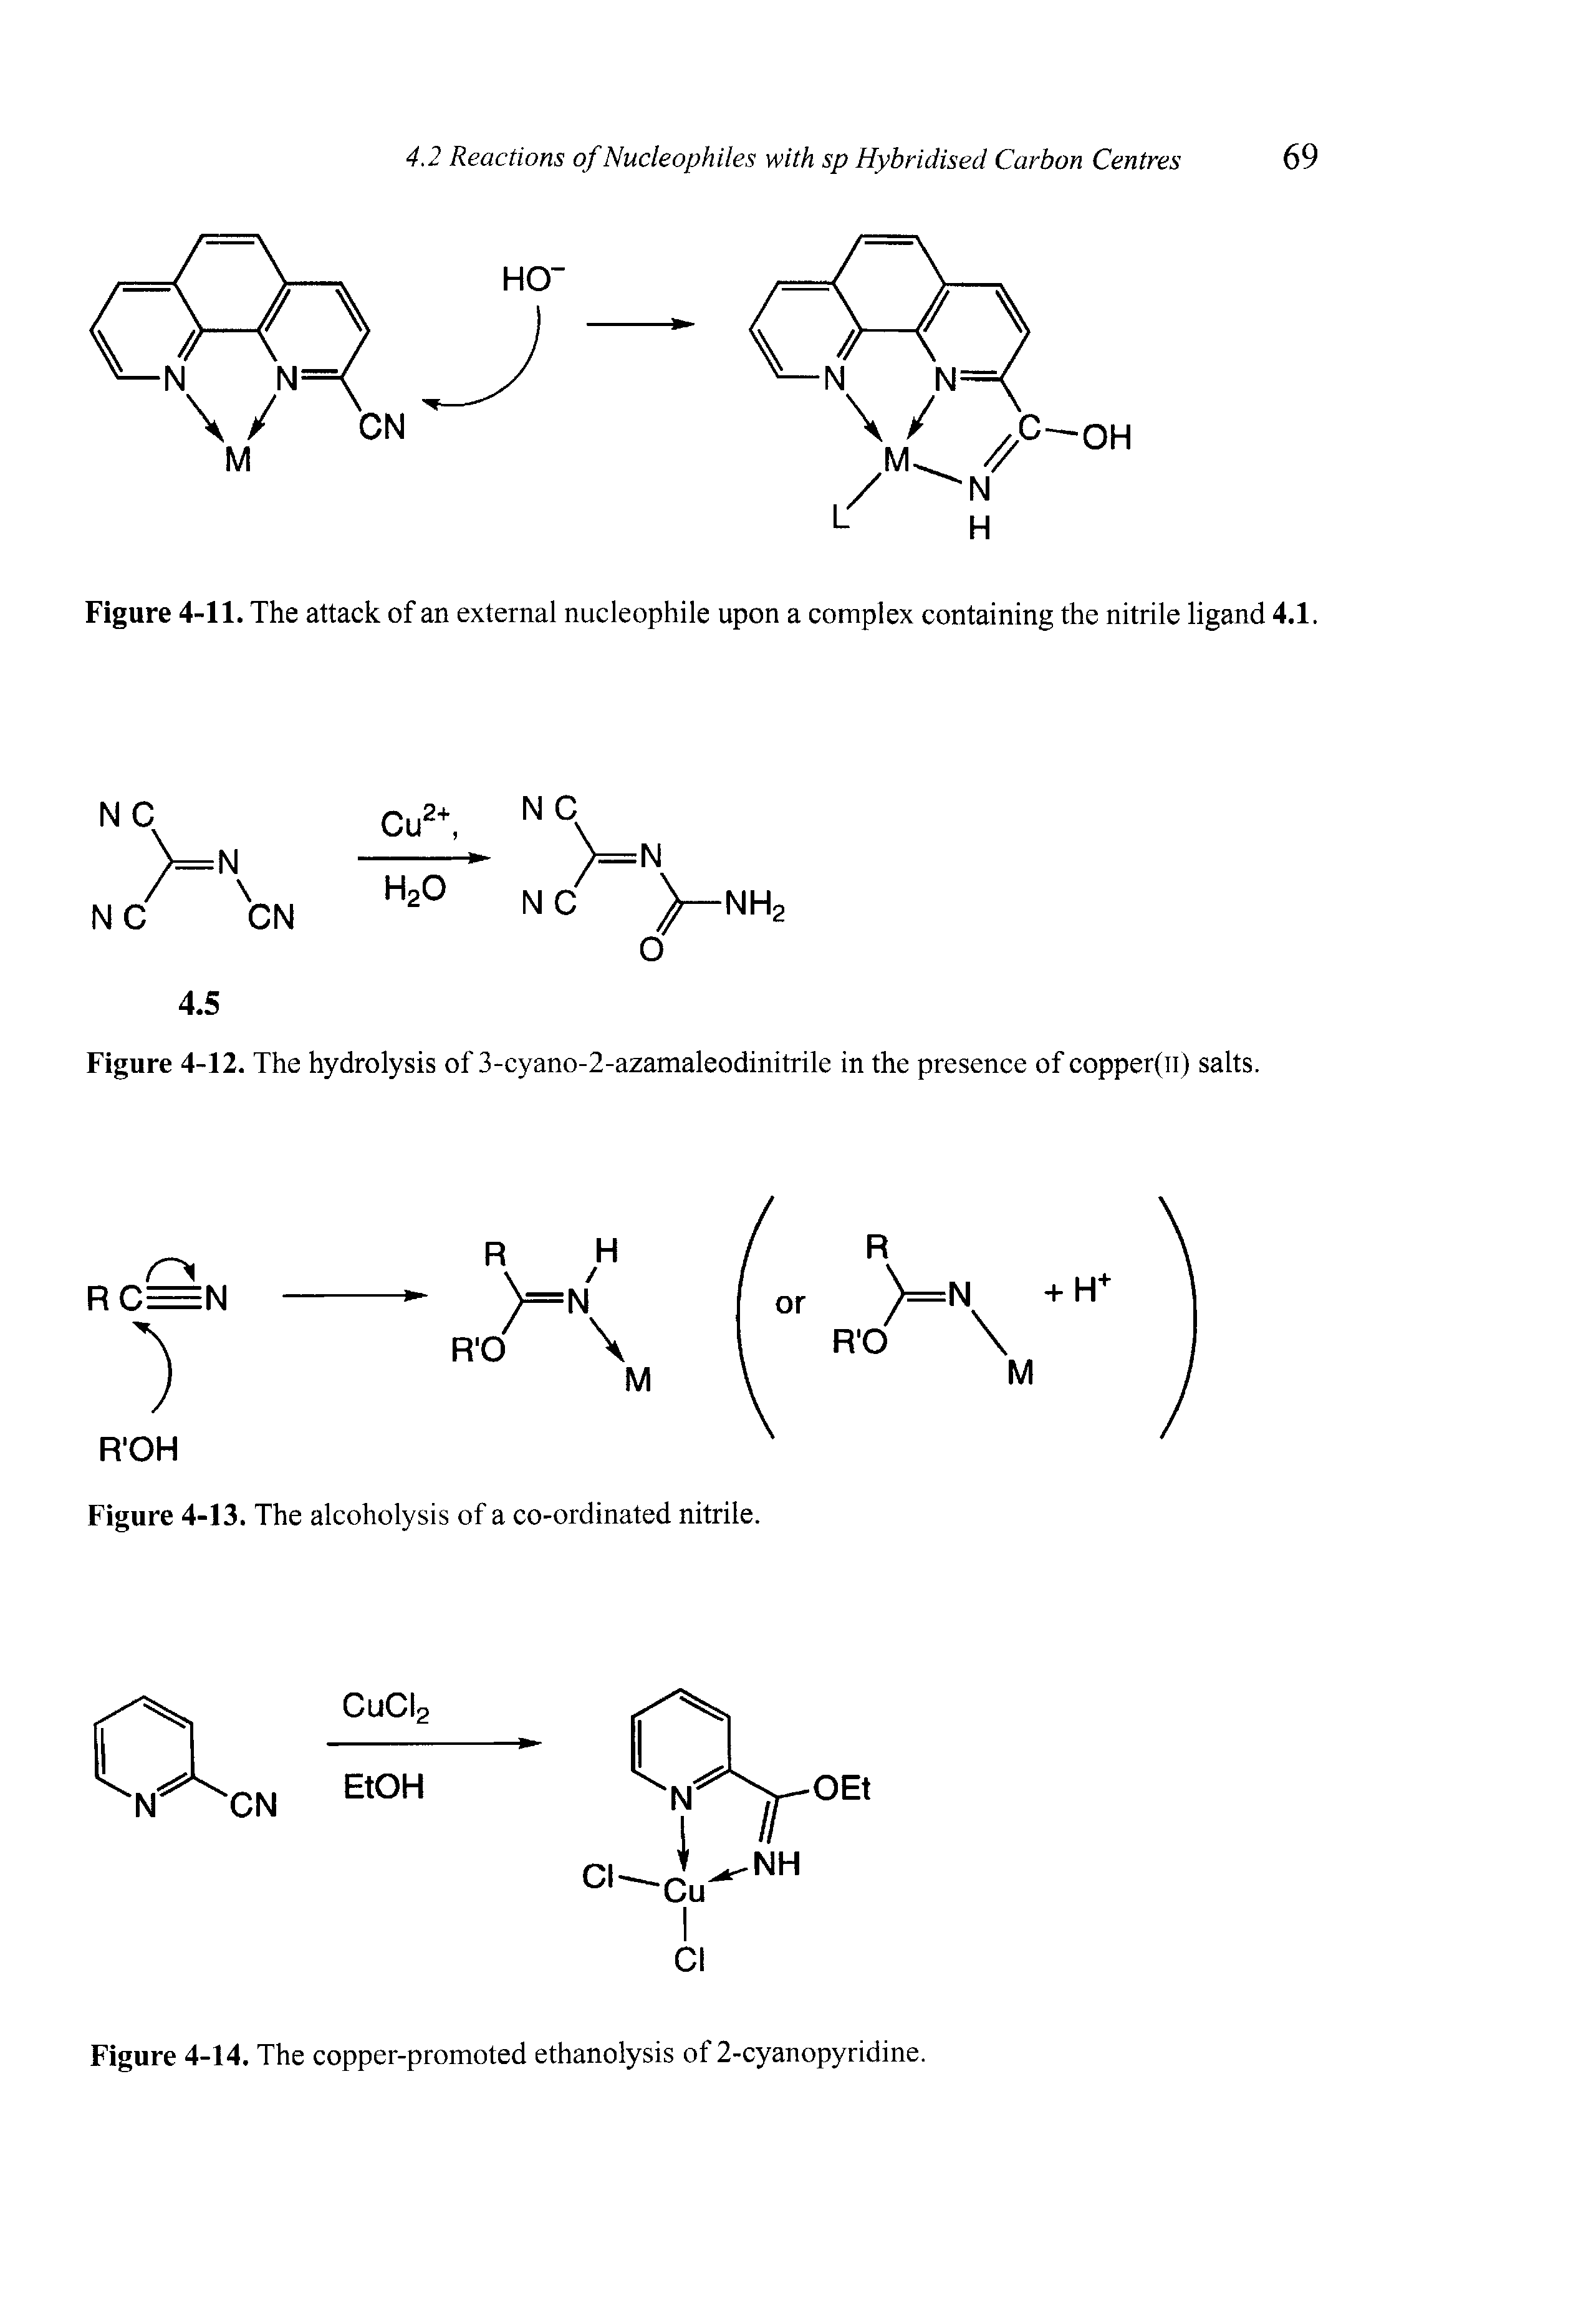 Figure 4-11. The attack of an external nucleophile upon a complex containing the nitrile ligand 4.1.